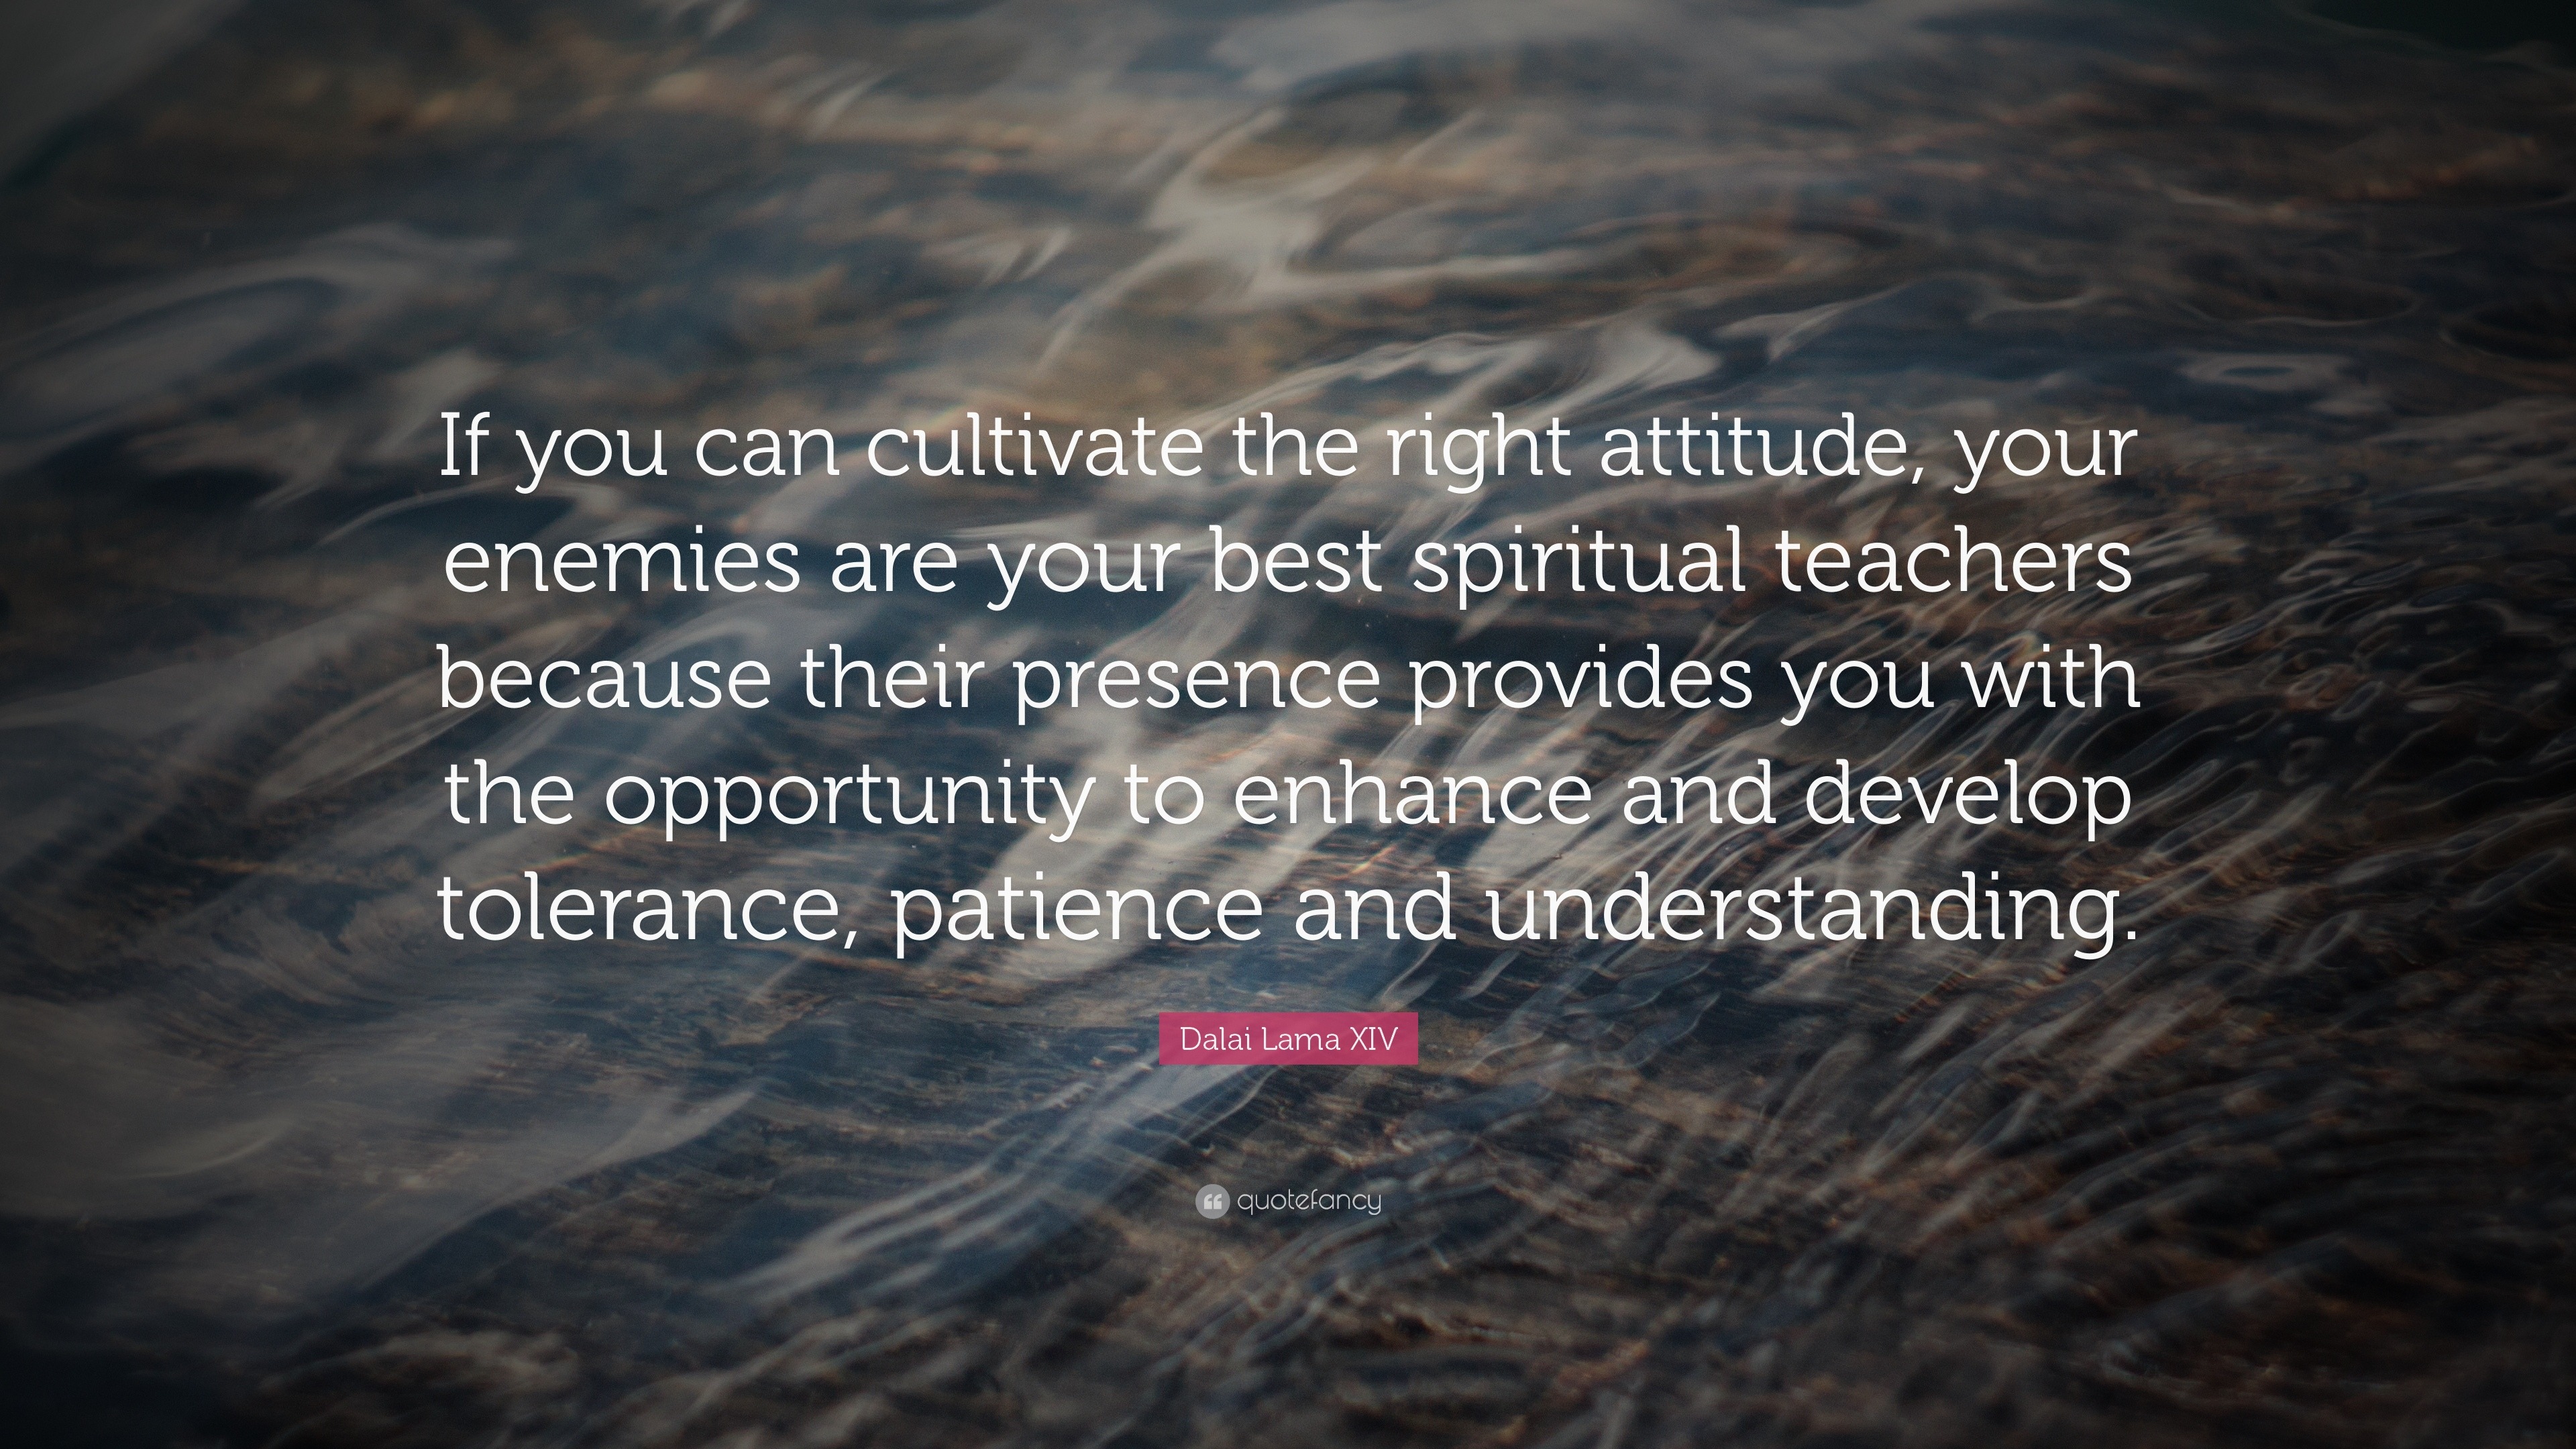 Dalai Lama XIV Quote “If you can cultivate the right attitude your enemies